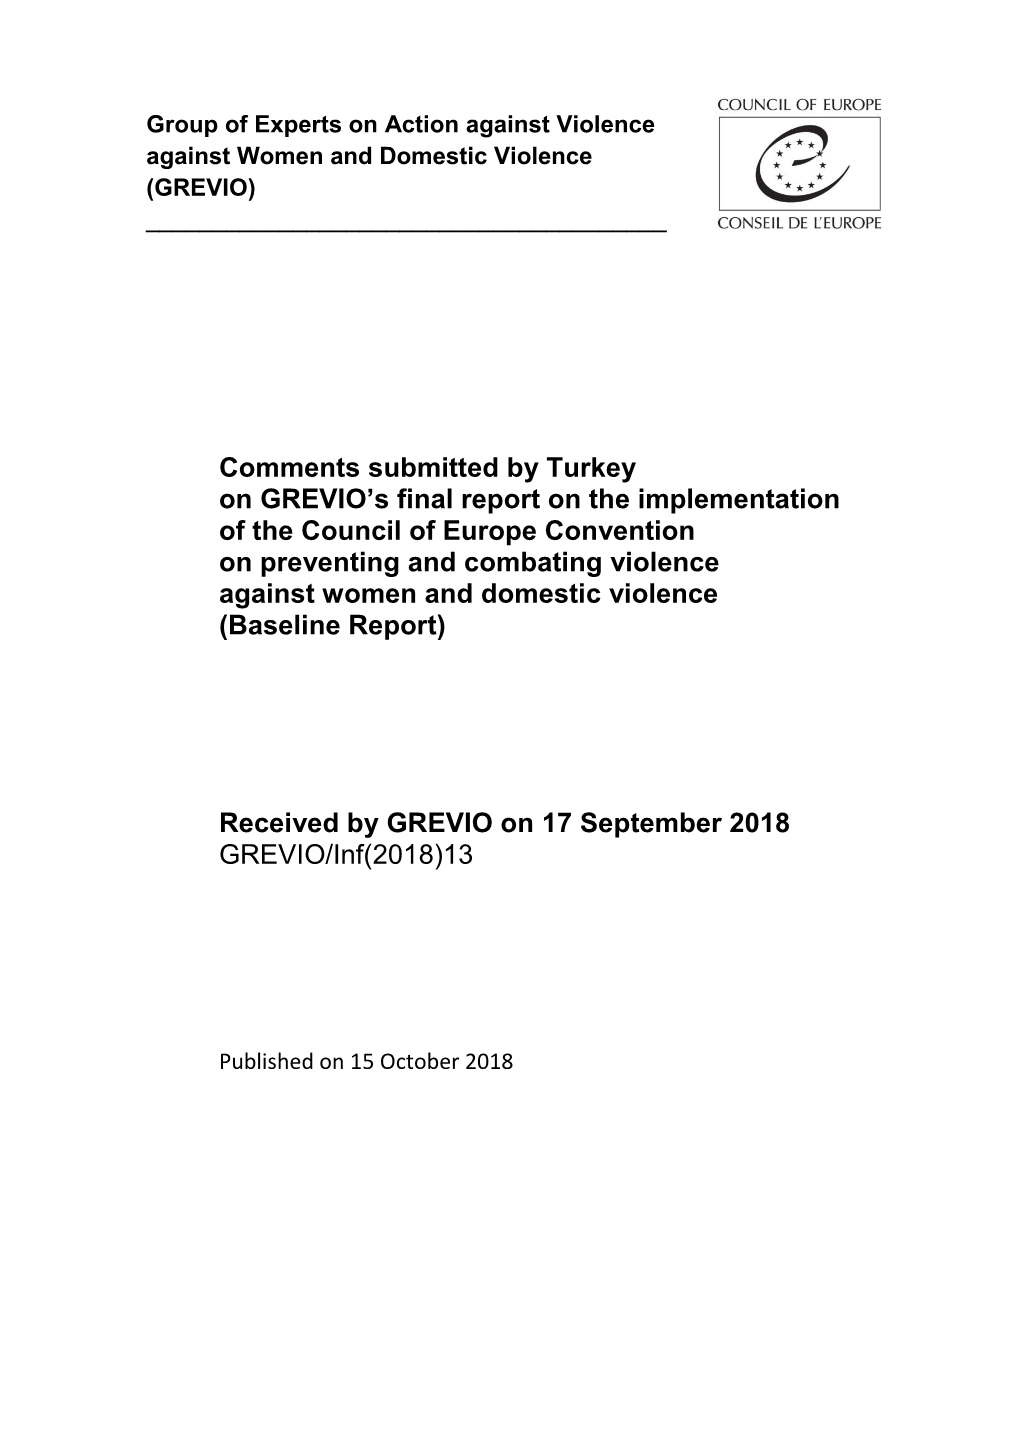 Comments Submitted by Turkey on GREVIO's Final Report on the Implementation of the Council of Europe Convention on Preventing